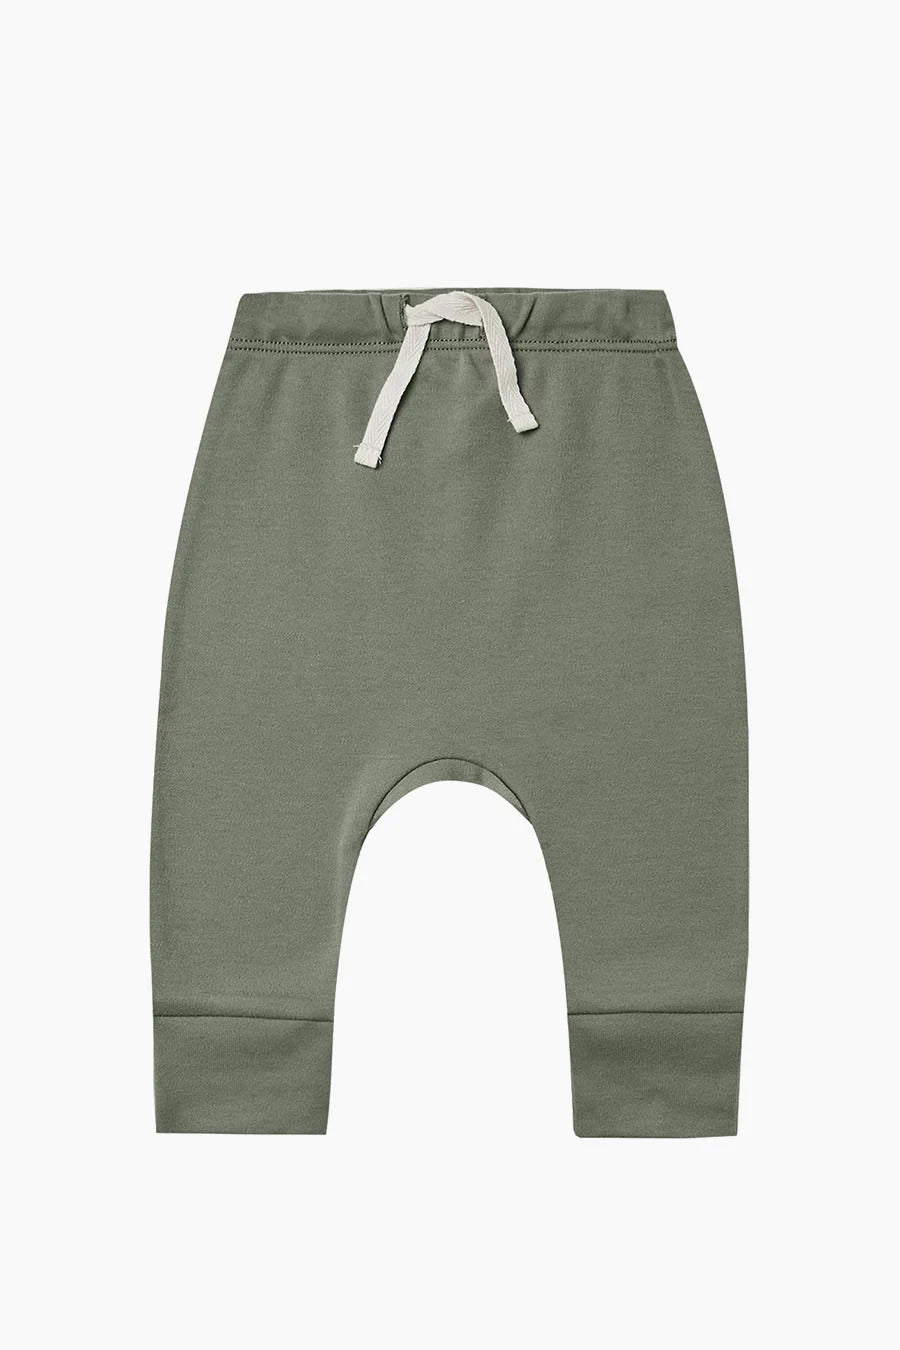 Quincy Mae Drawstring Pant - Multiple Options